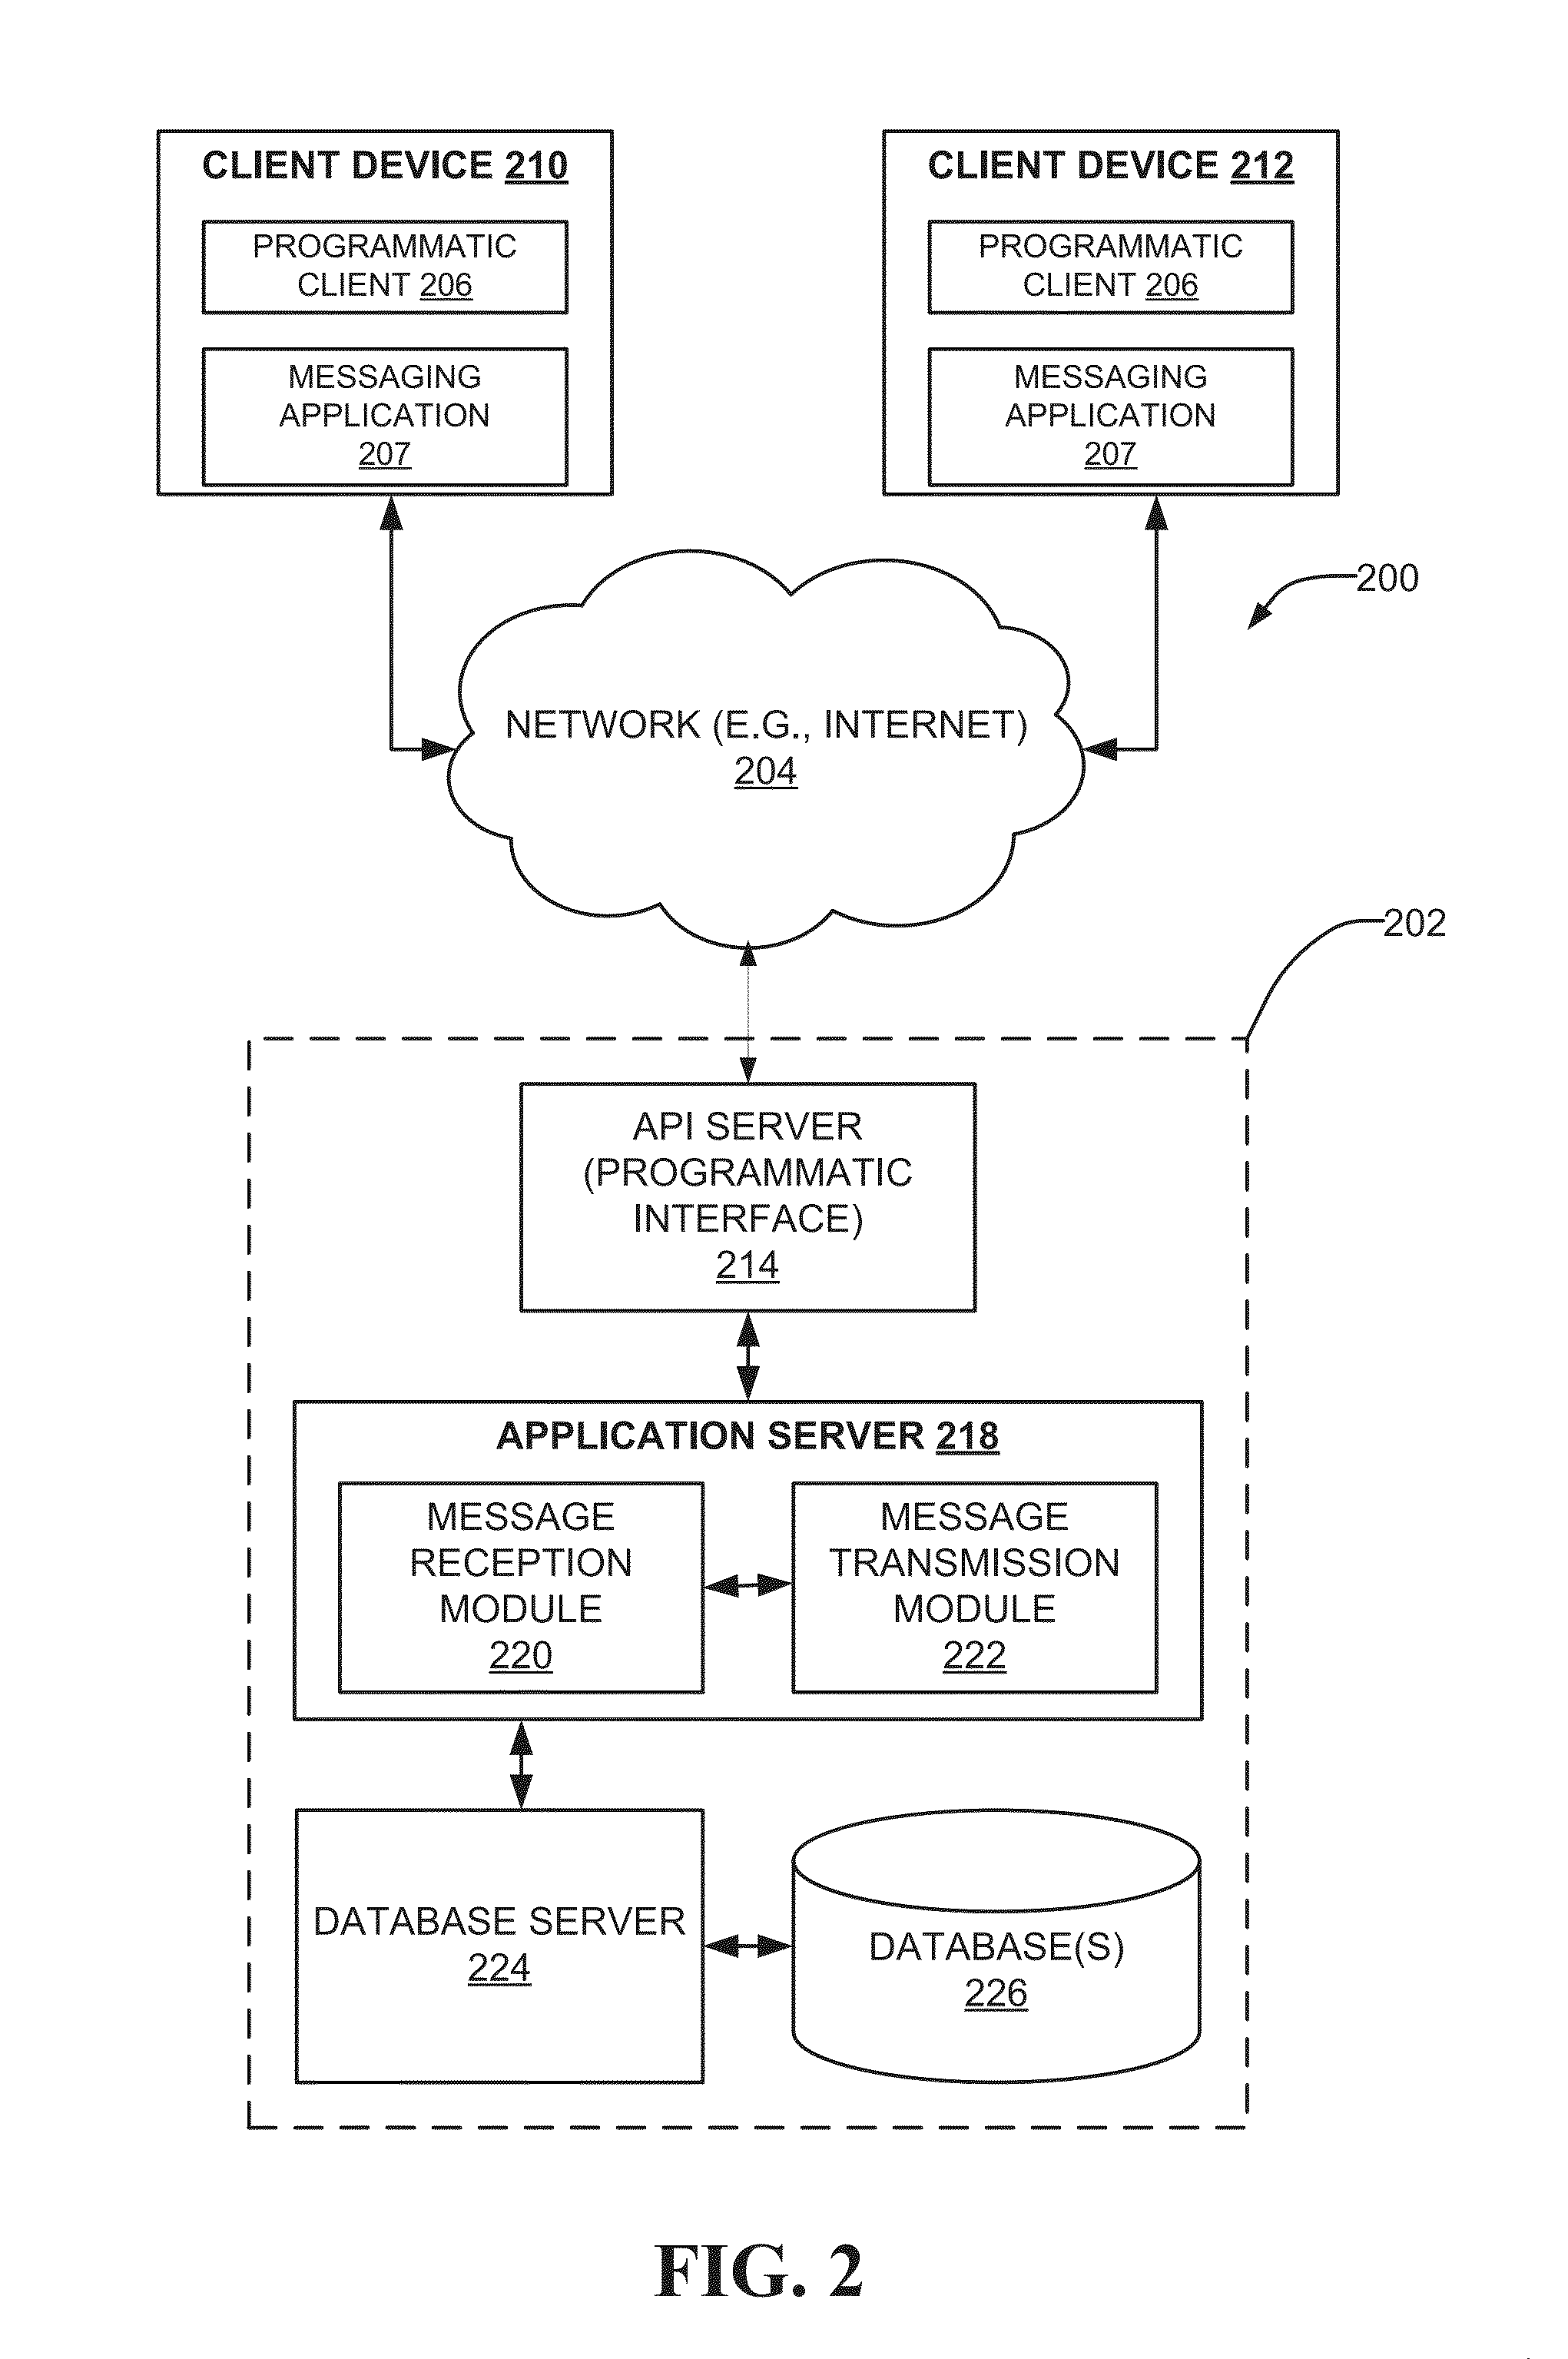 Storage and processing of ephemeral messages